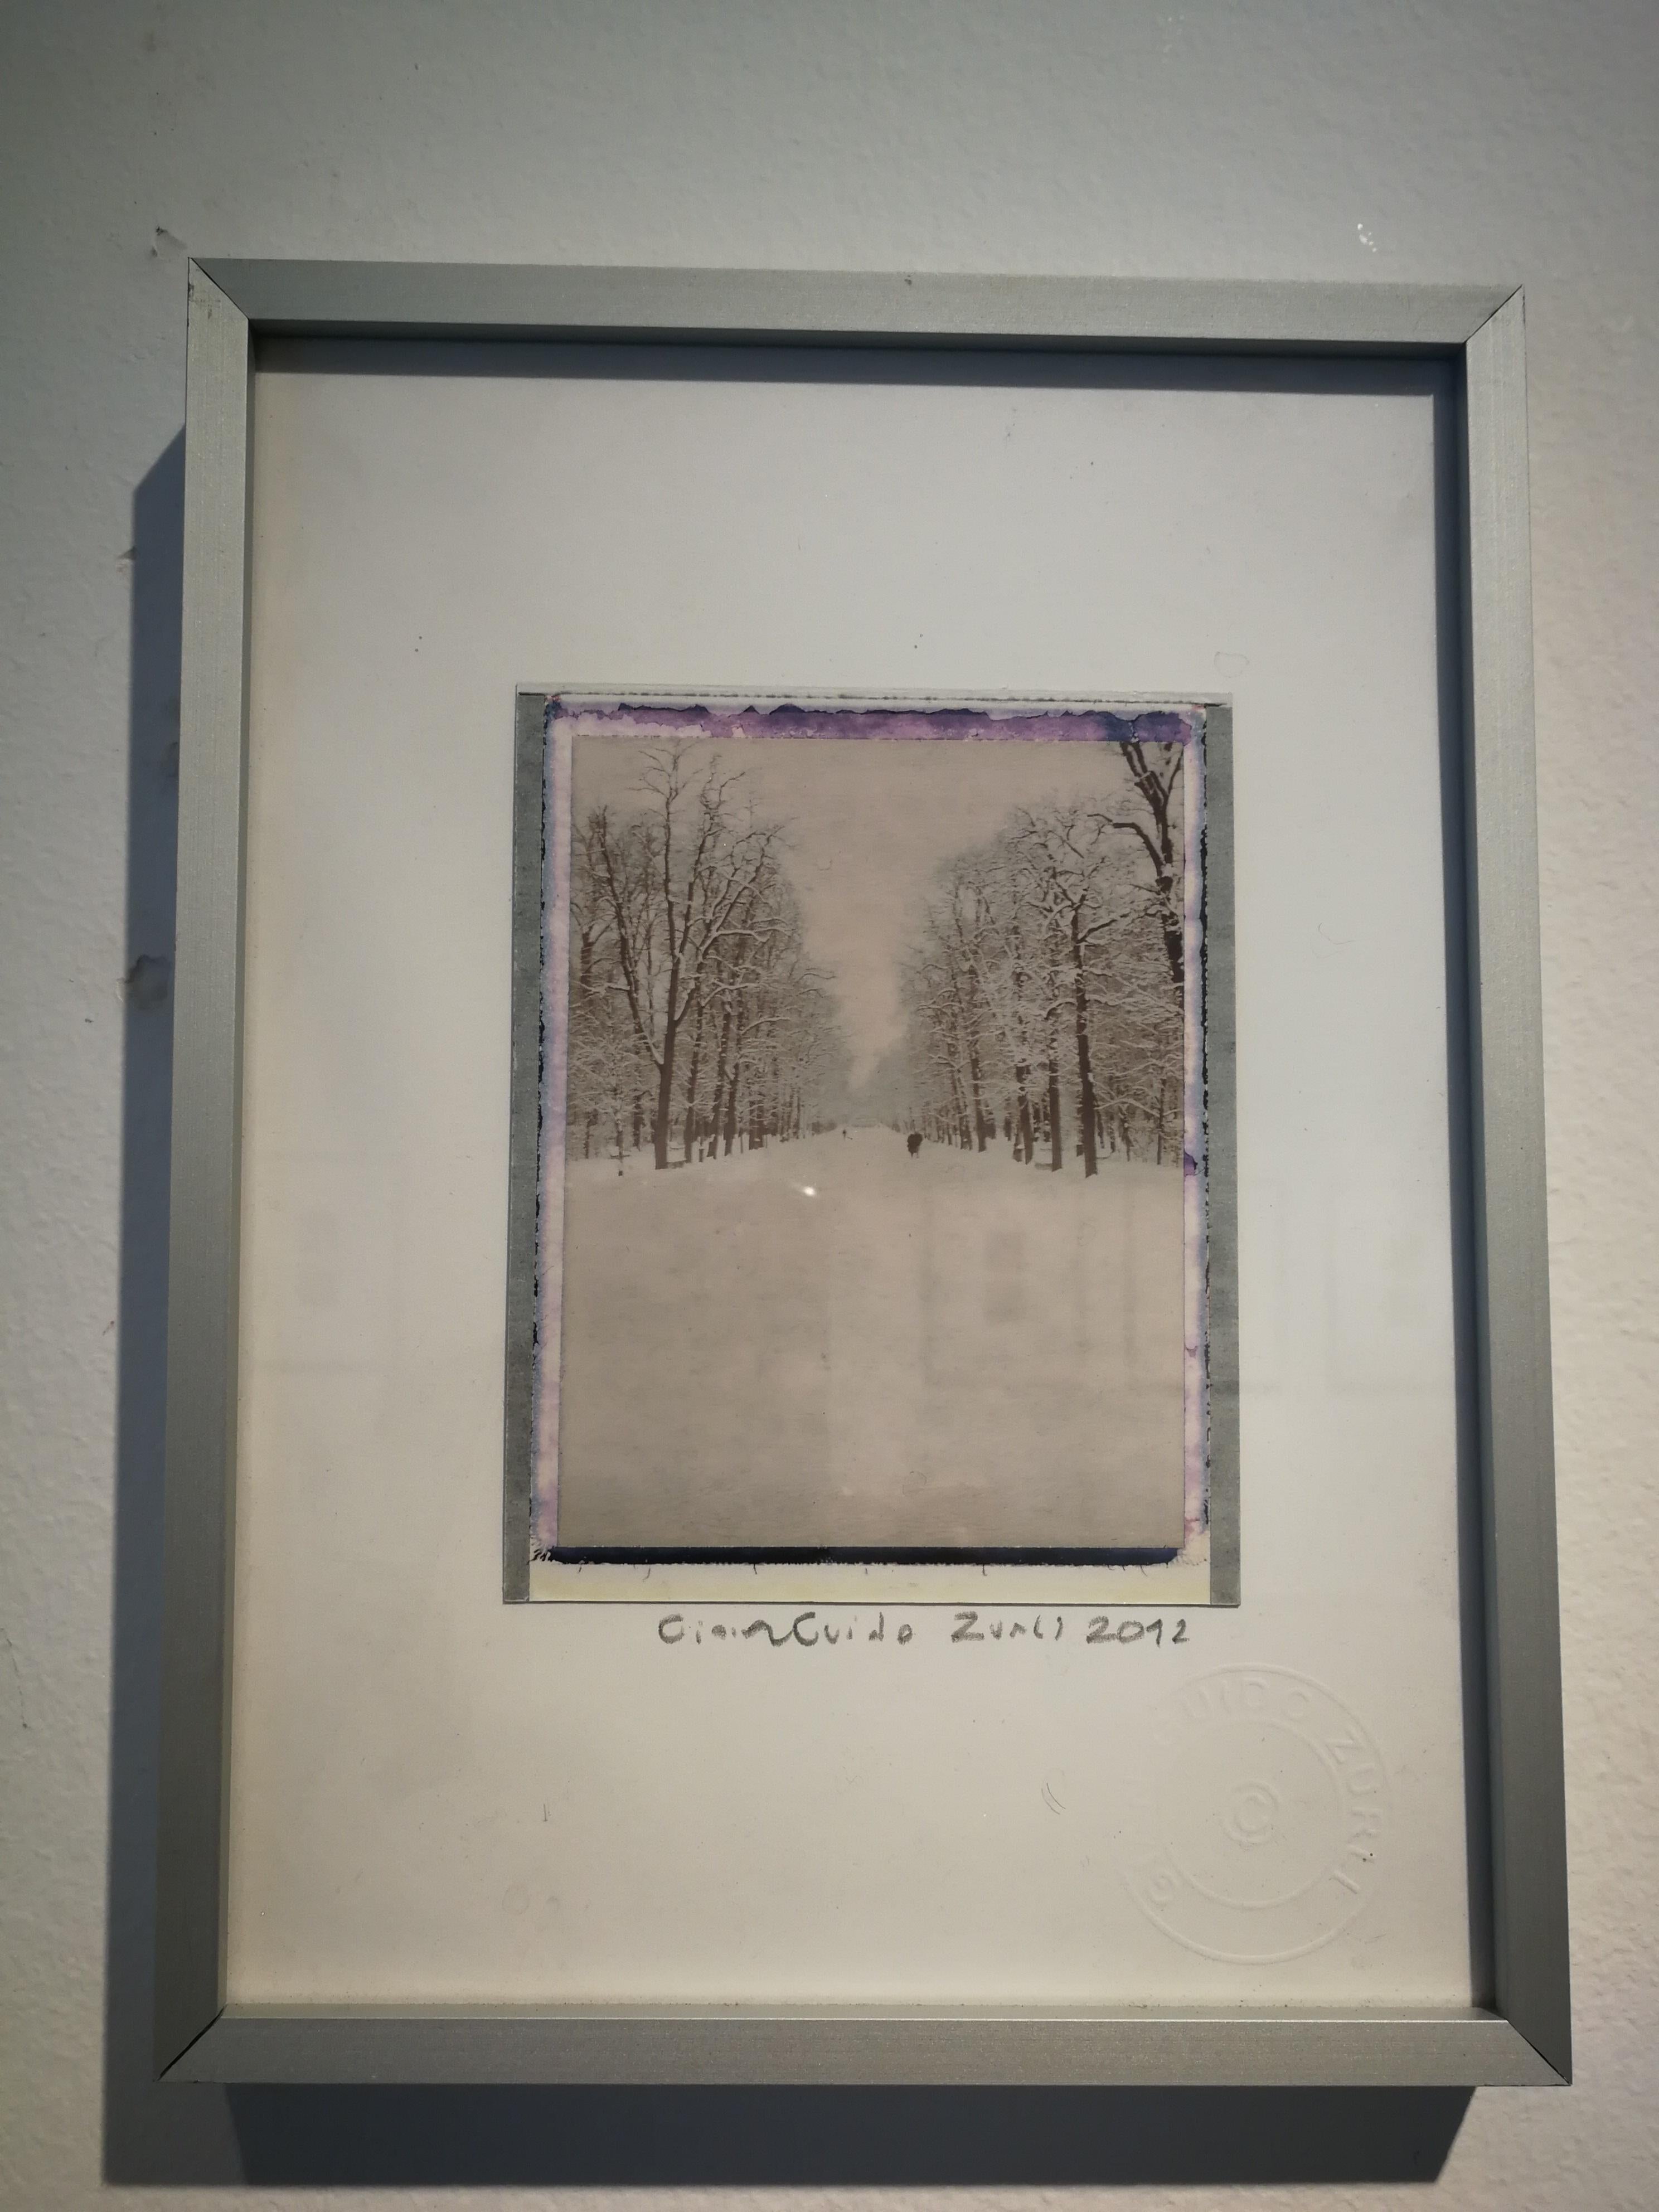 This photo is part of a series of landscapes made in Parma with an original Chocolate Polaroid Film.
The polaroid is joined to a print of the same photo.

Gian Guido Zurli was born in Parma in 1977 and has been working in the world of video editing